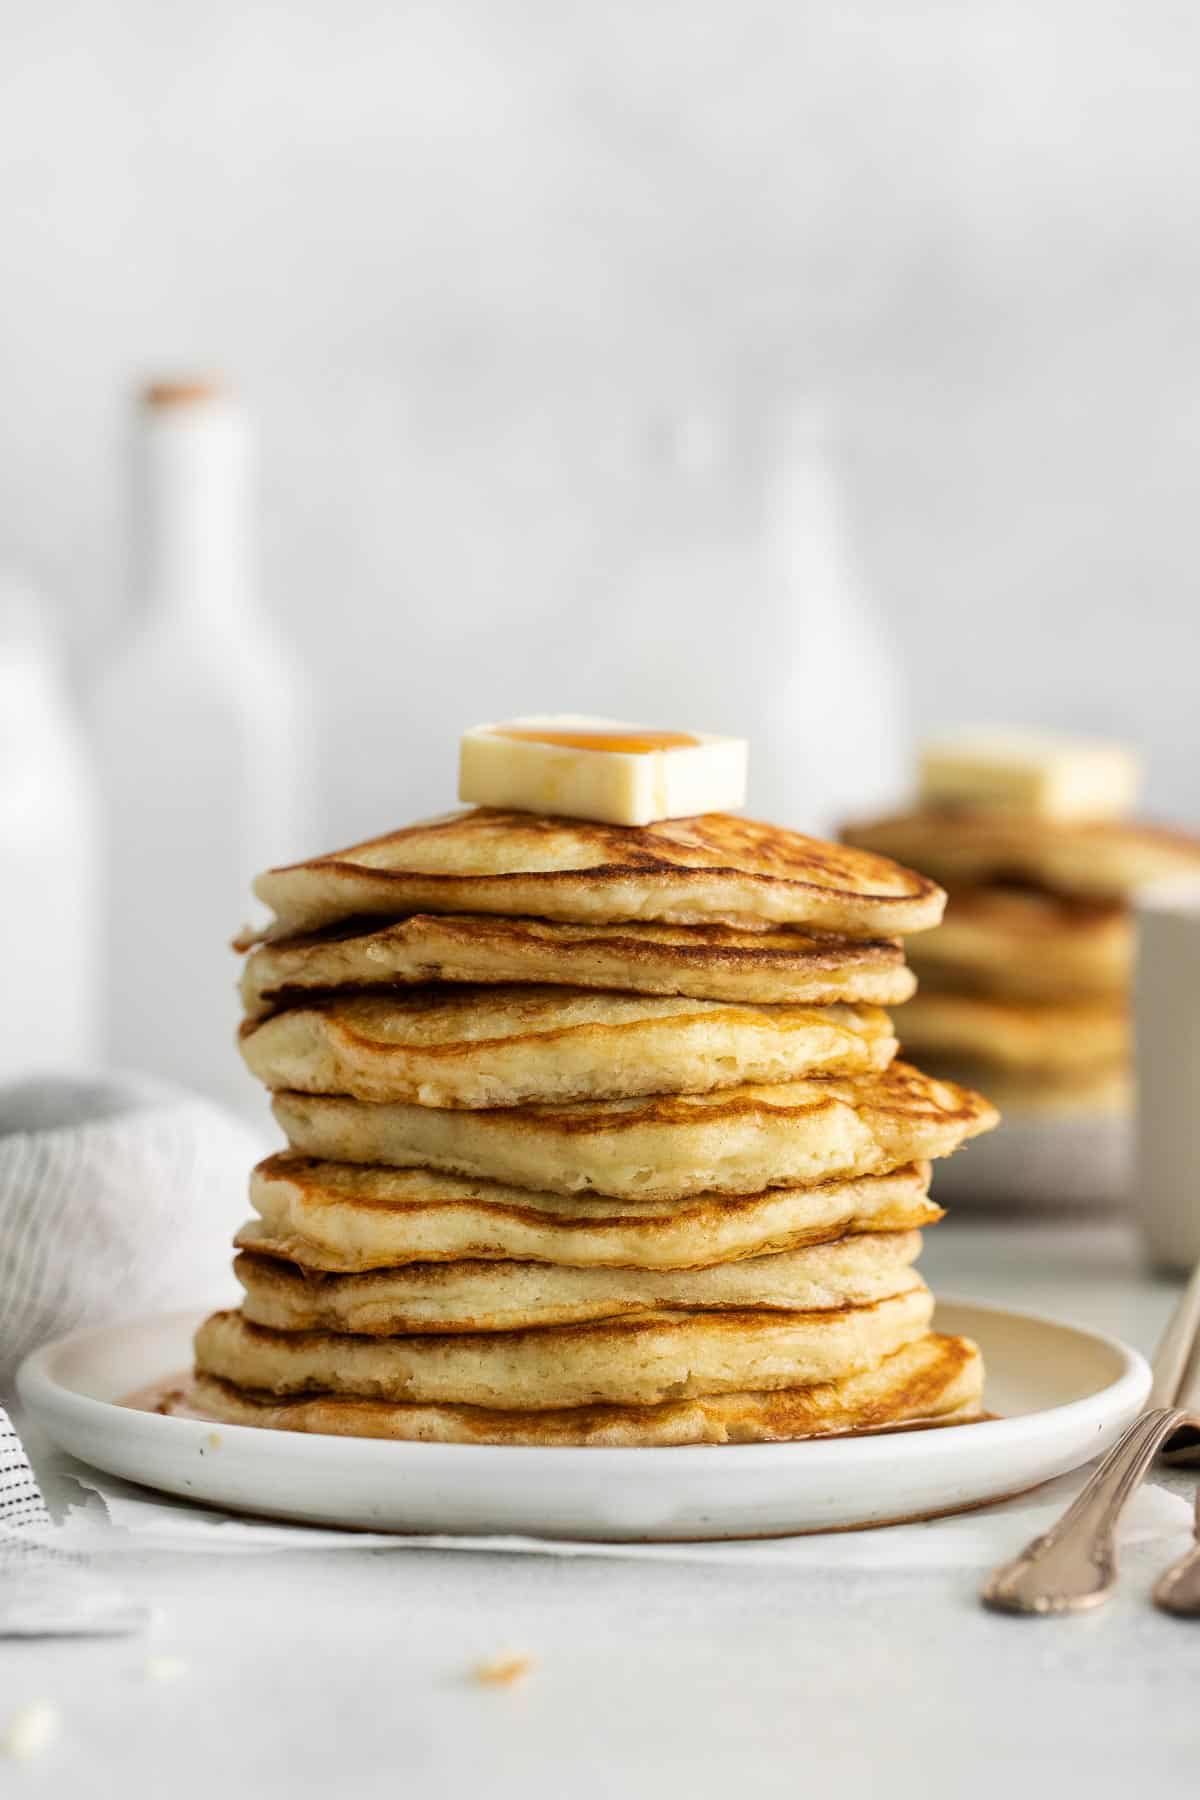 A stack of buttermilk pancakes on a plate